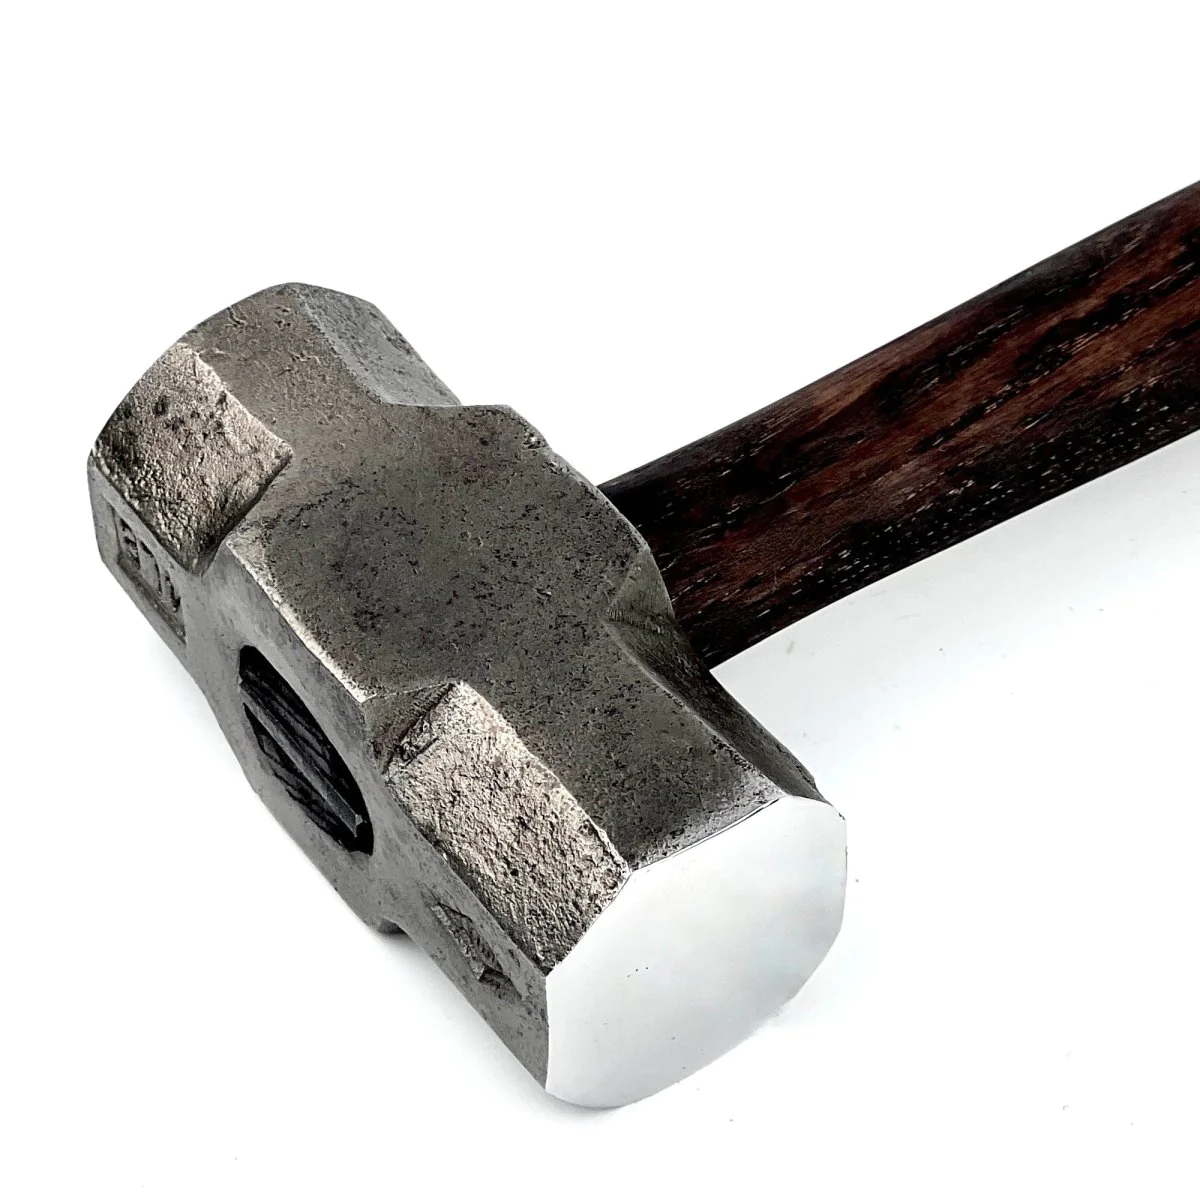 A close-up of a forged tool steel head of a sledge hammer